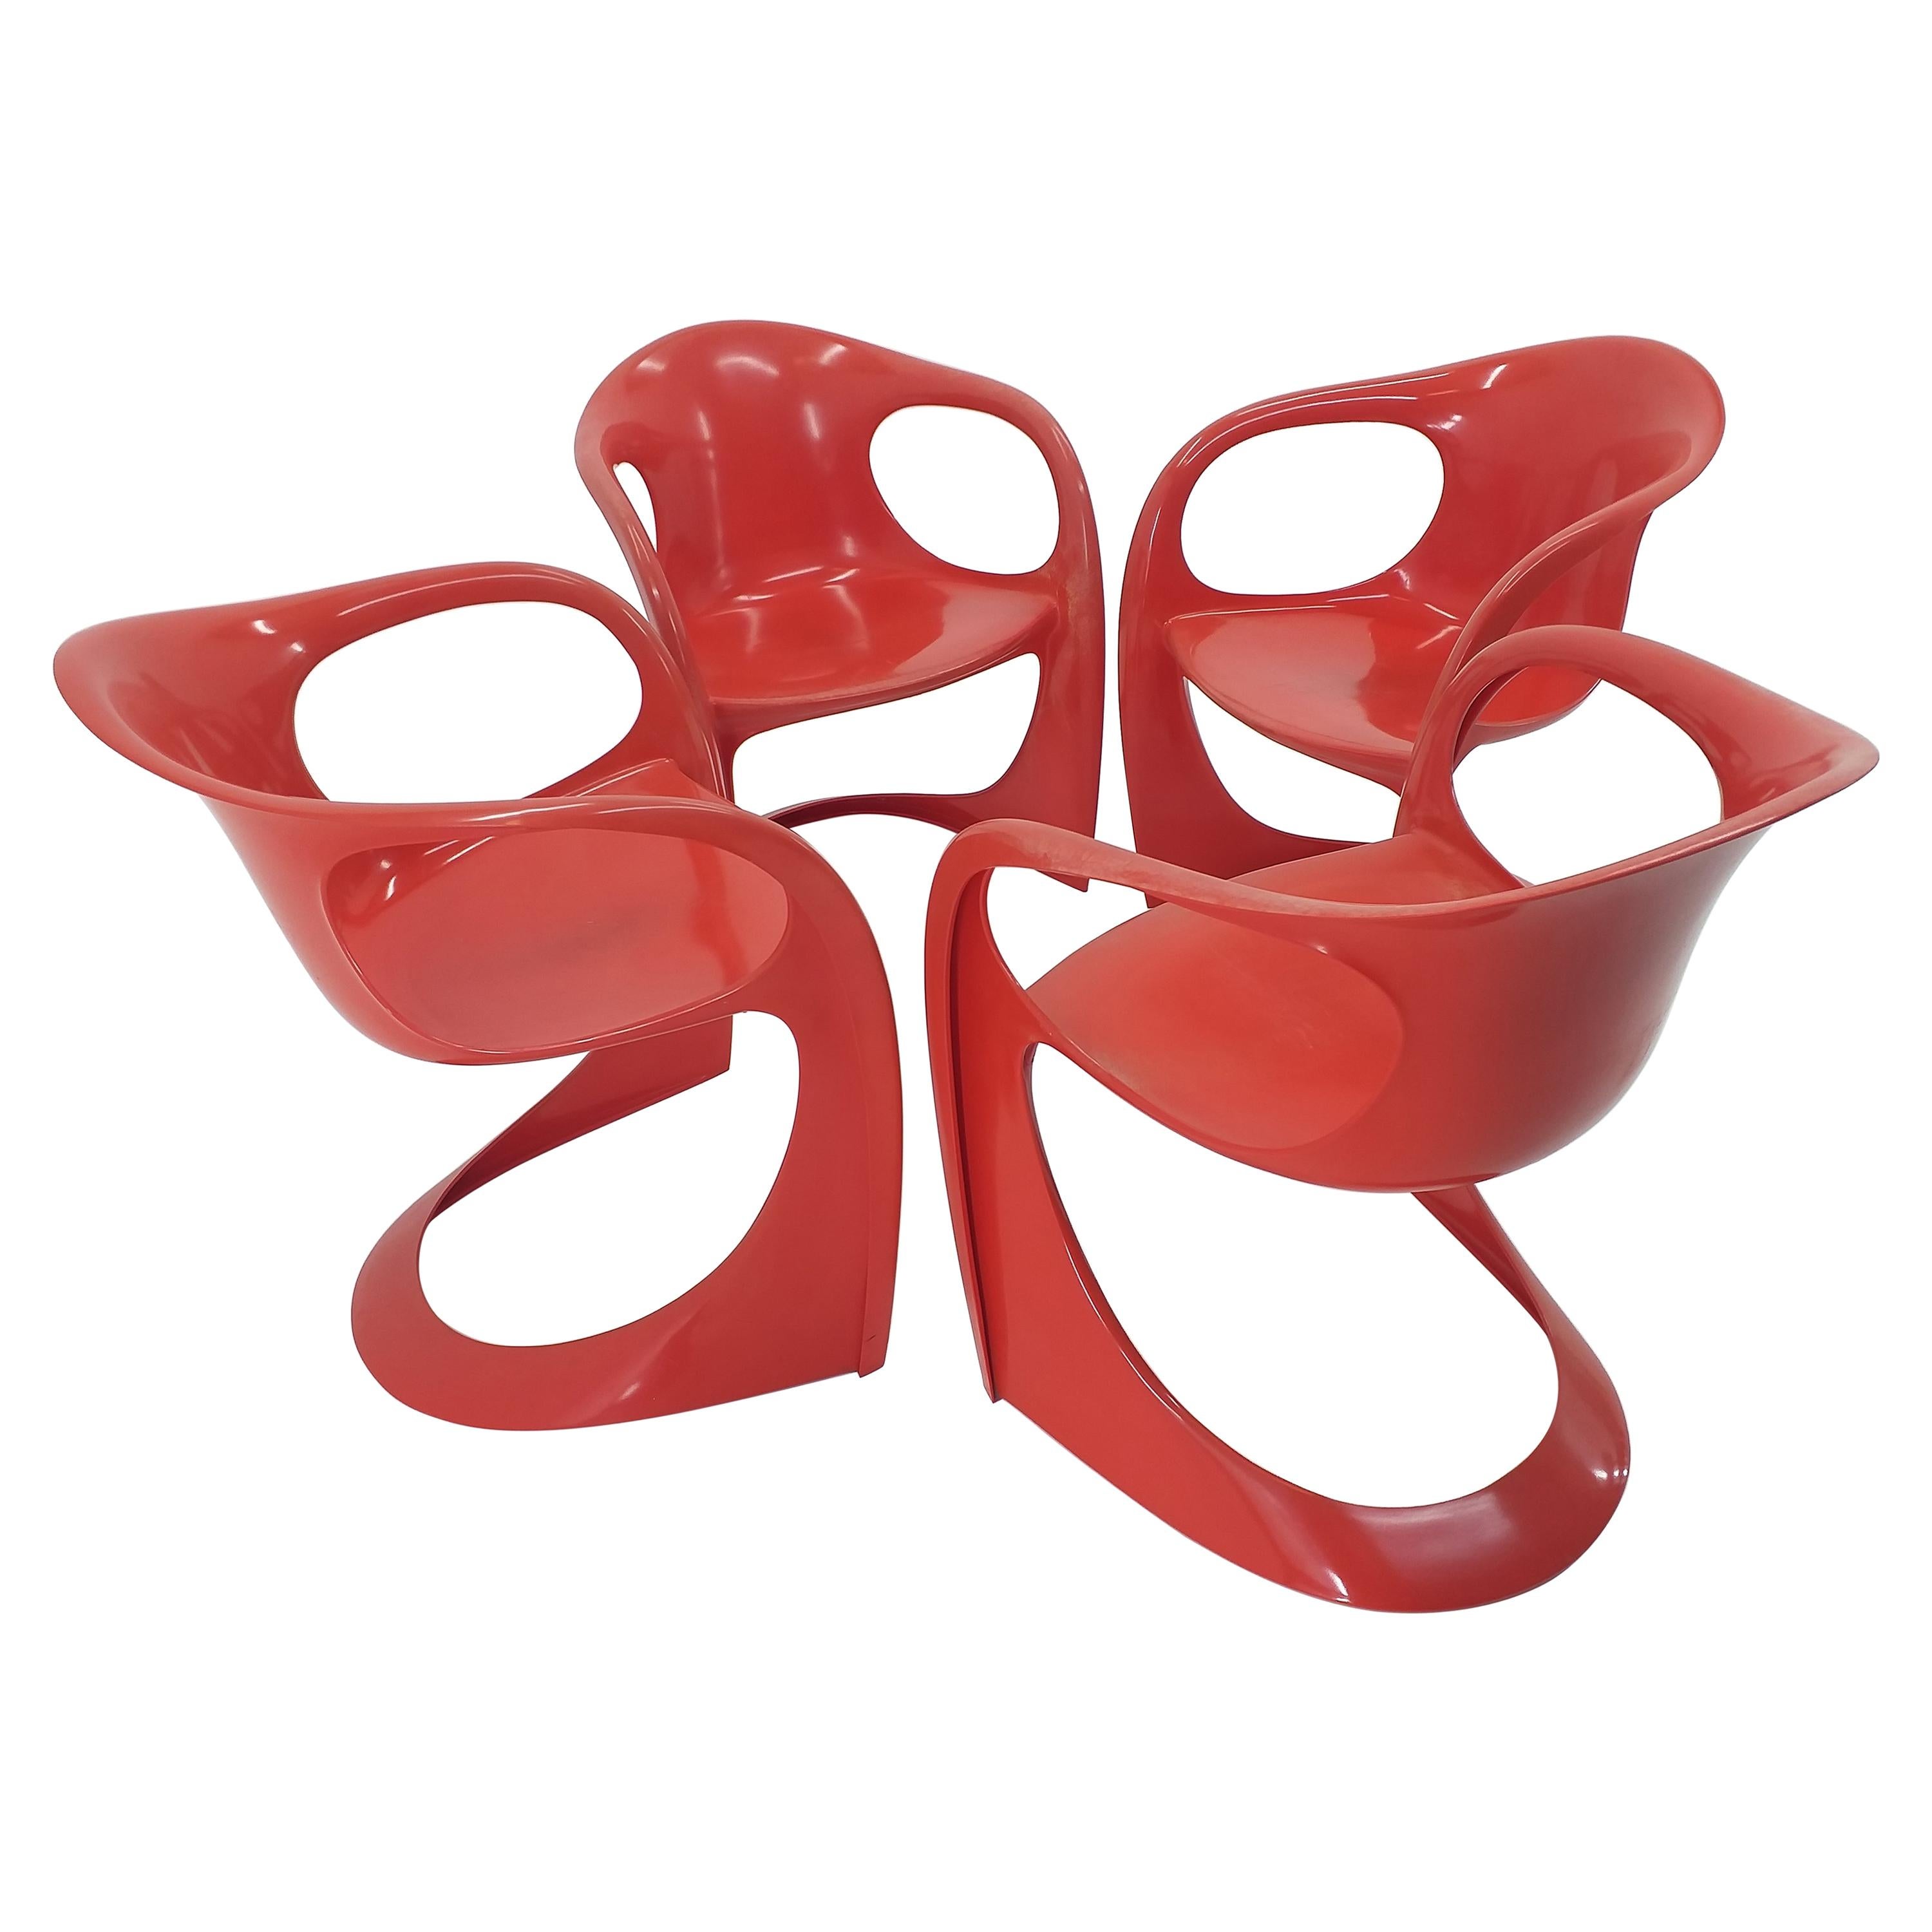 Set of Four Casalino Chairs, Alexander Begge, Casala, Germany, 1970s